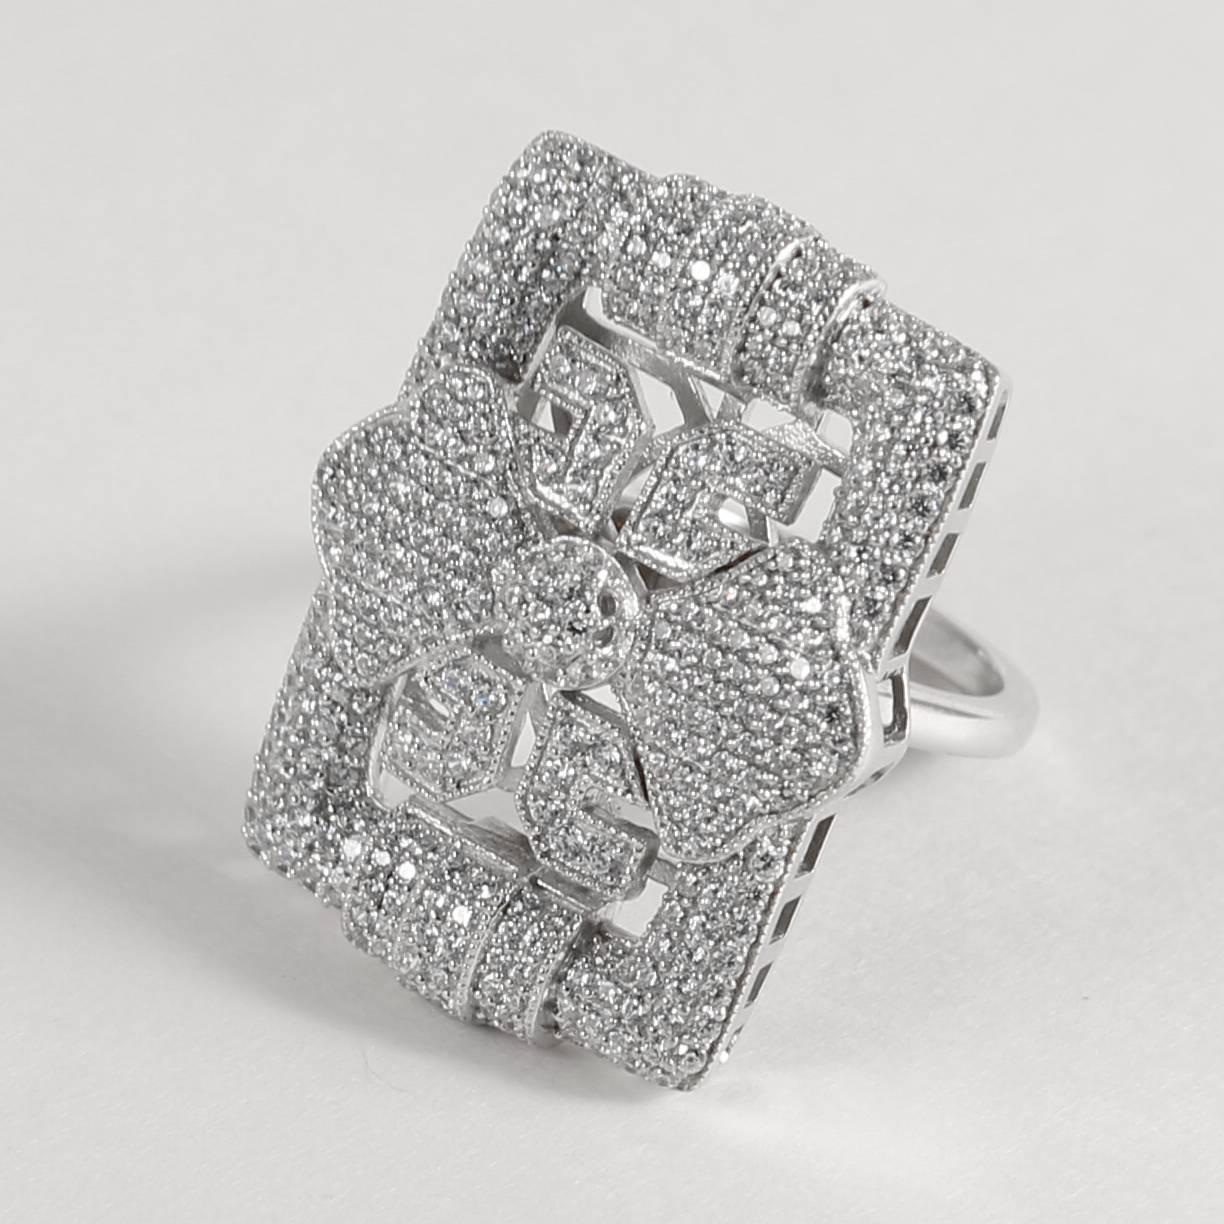 Elegant Art Deco style pave sterling cocktail ring measures 1 1/4 inches by 1 inch wide pave set cubic zircons set in sterling silver. Sizing is free. 